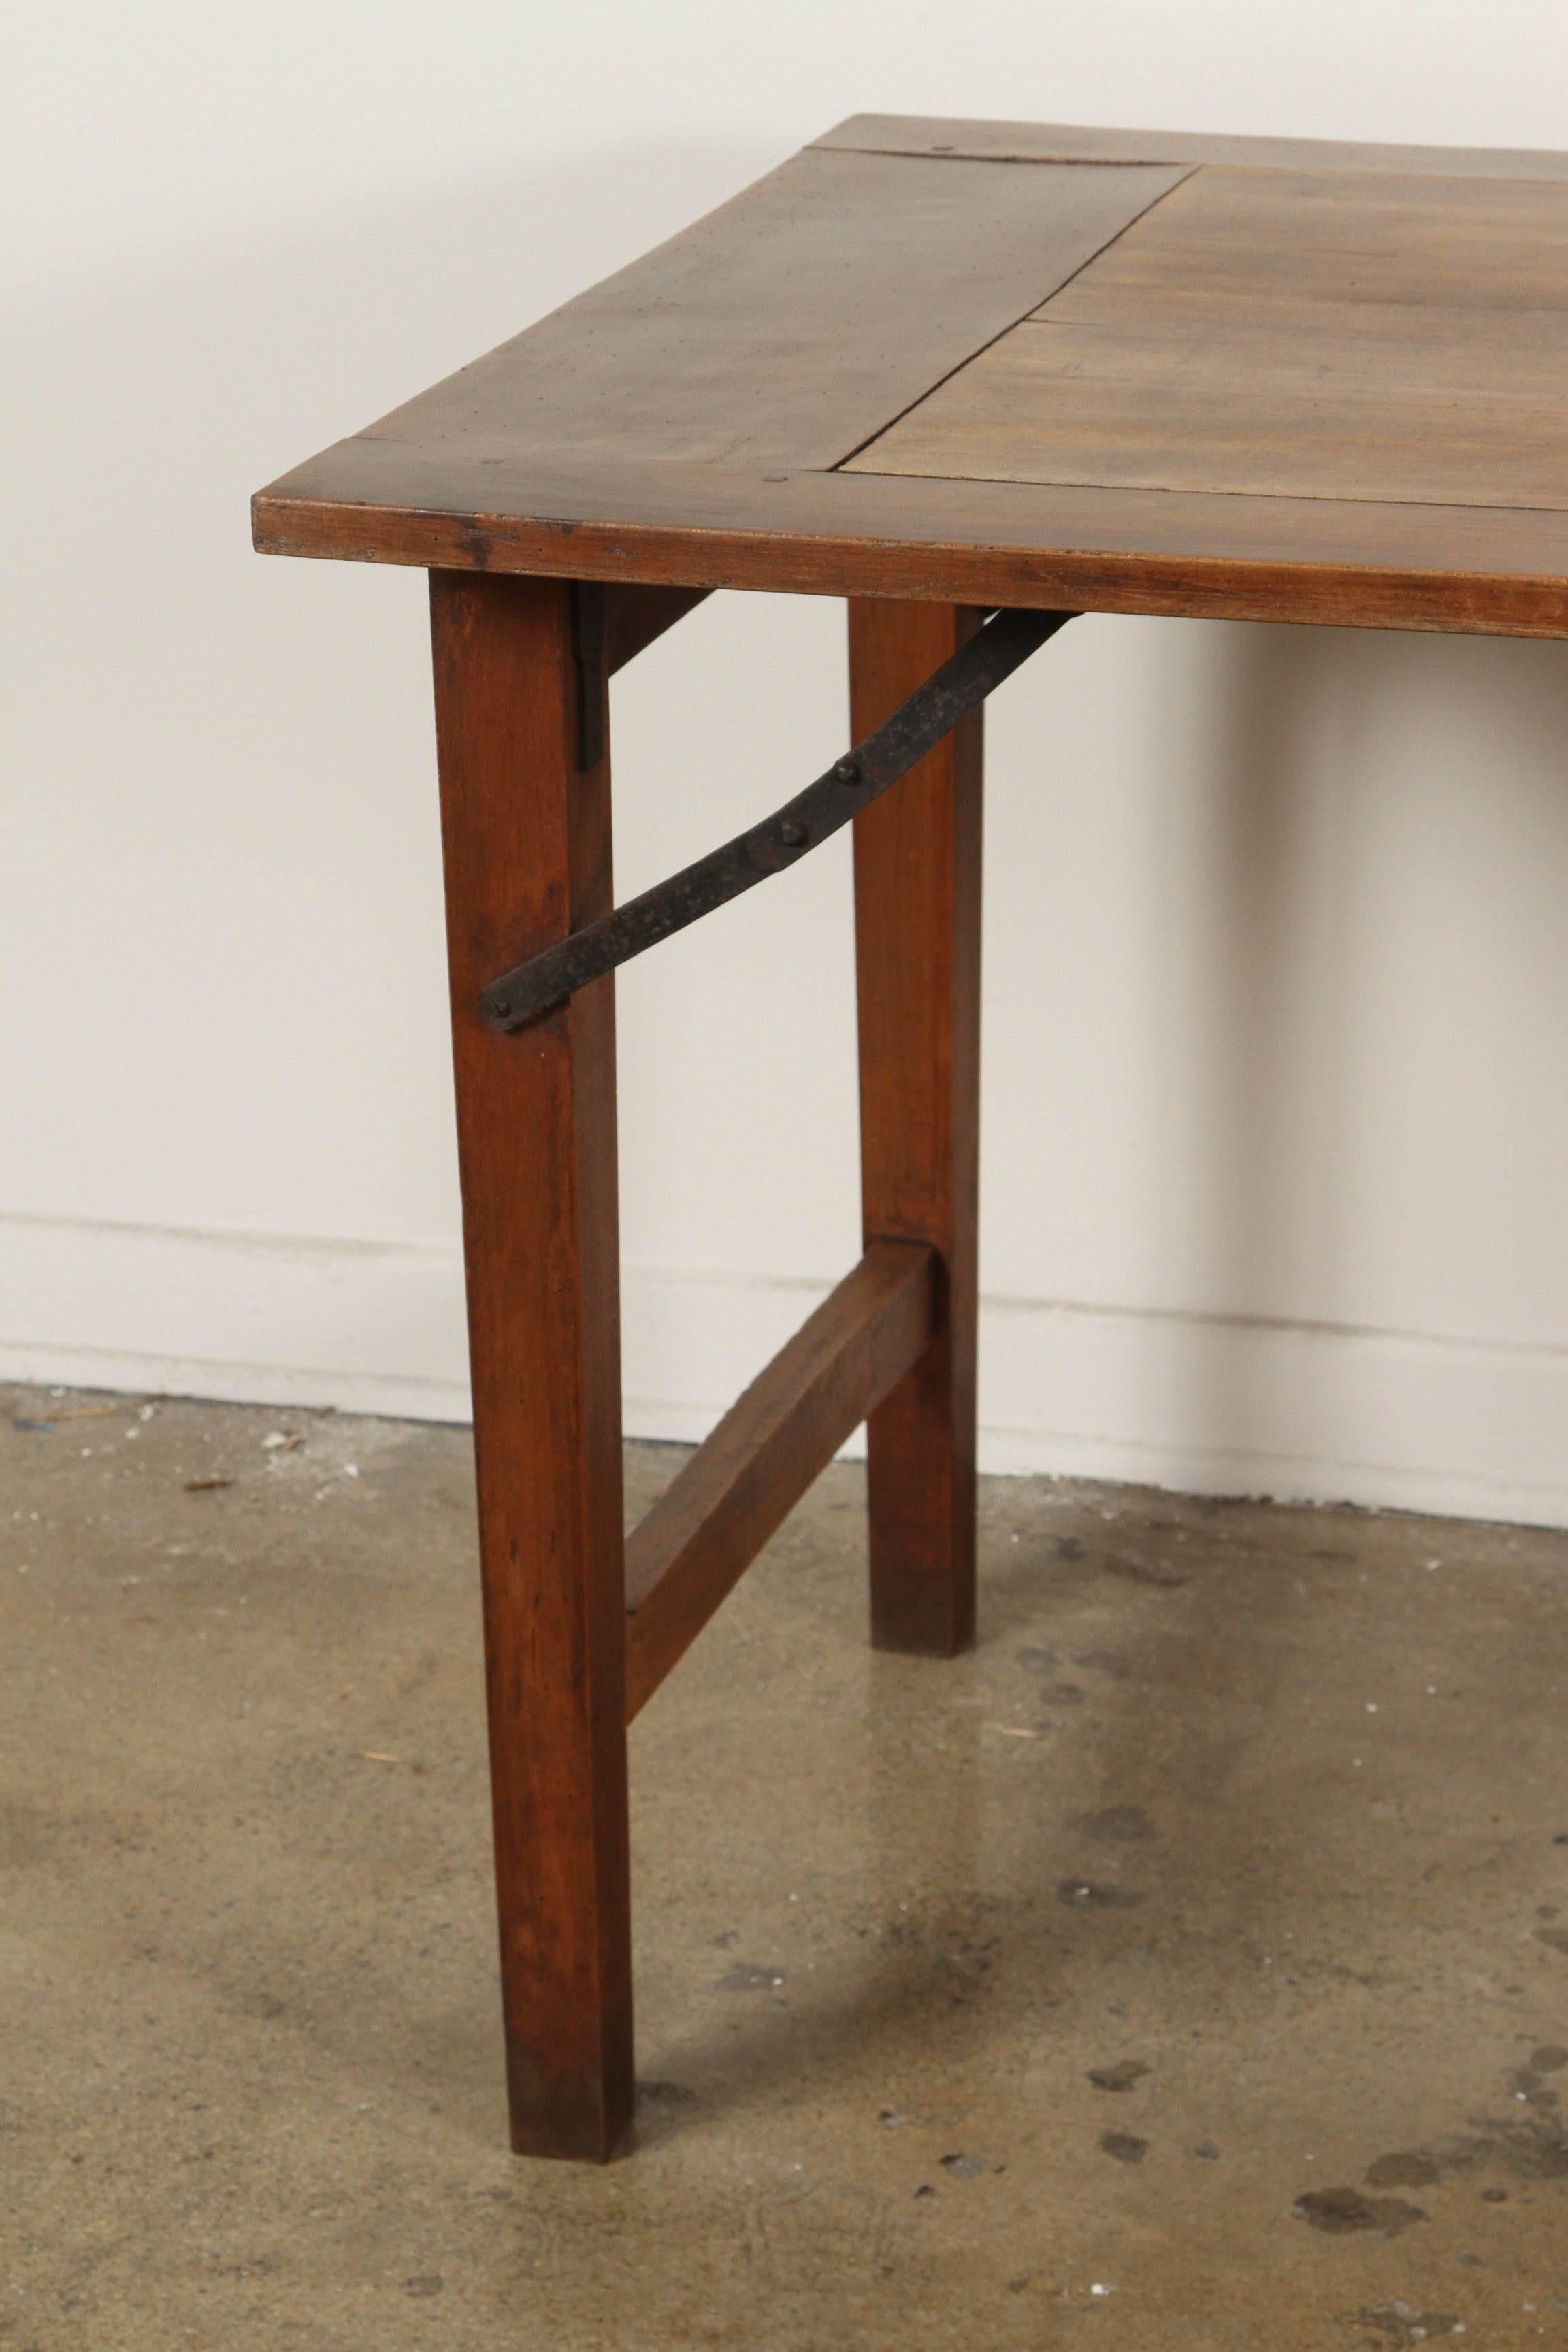 Late 19th-century French walnut wood table with collapsable folding legs. Perfect as a dining table, workbench, or long desk, the exposed mechanics of the iron arms provide an industrial accent to the otherwise provincial nature of this